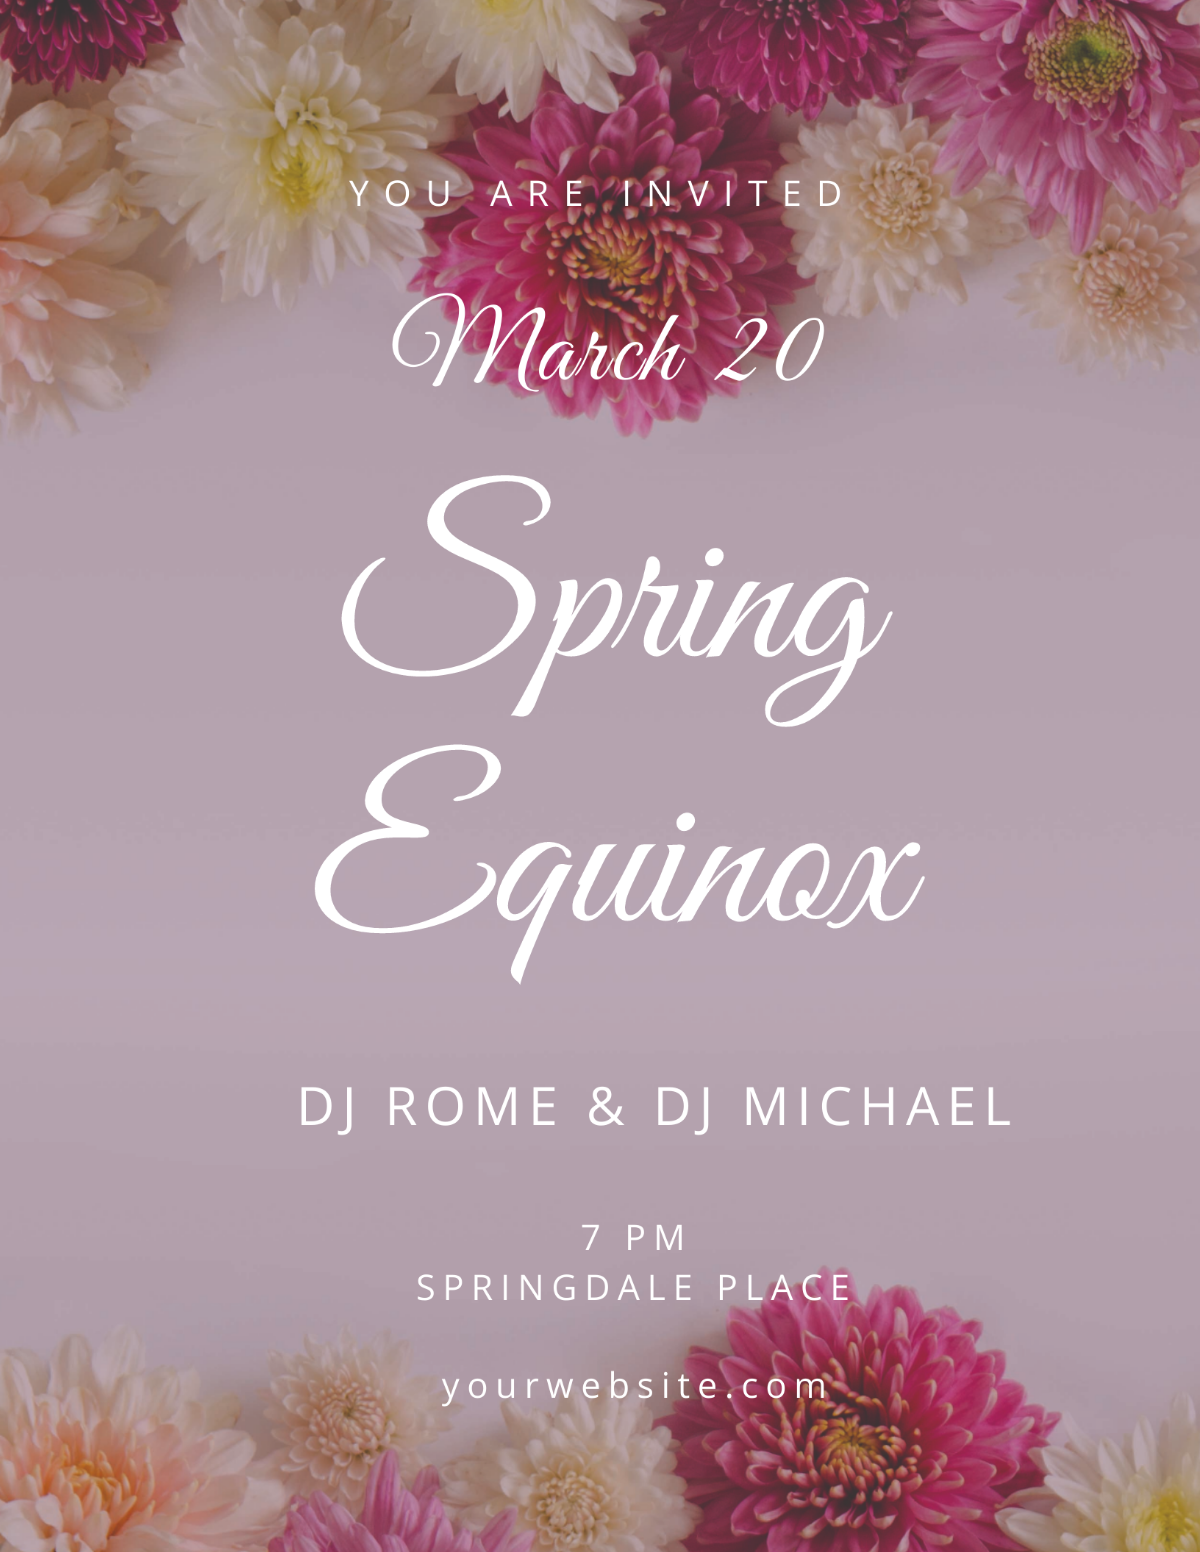 Free Spring Equinox Flyer Template